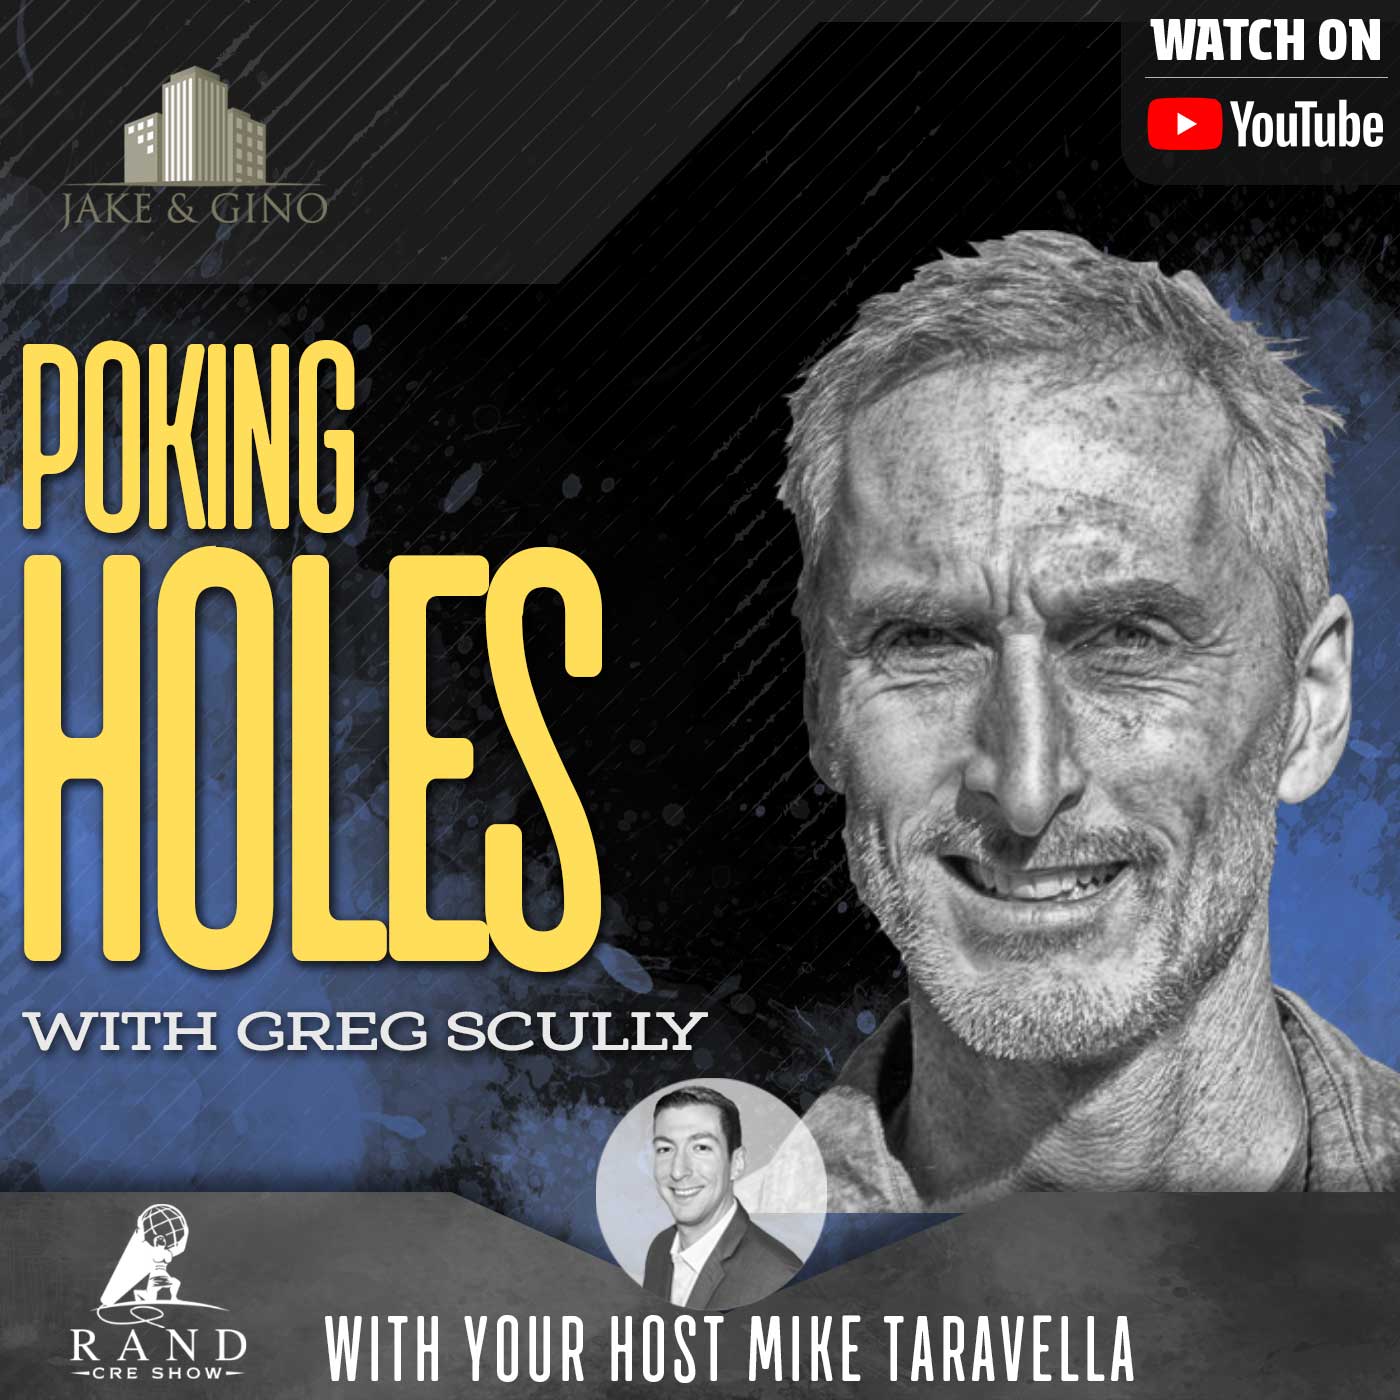 Podcast featured image